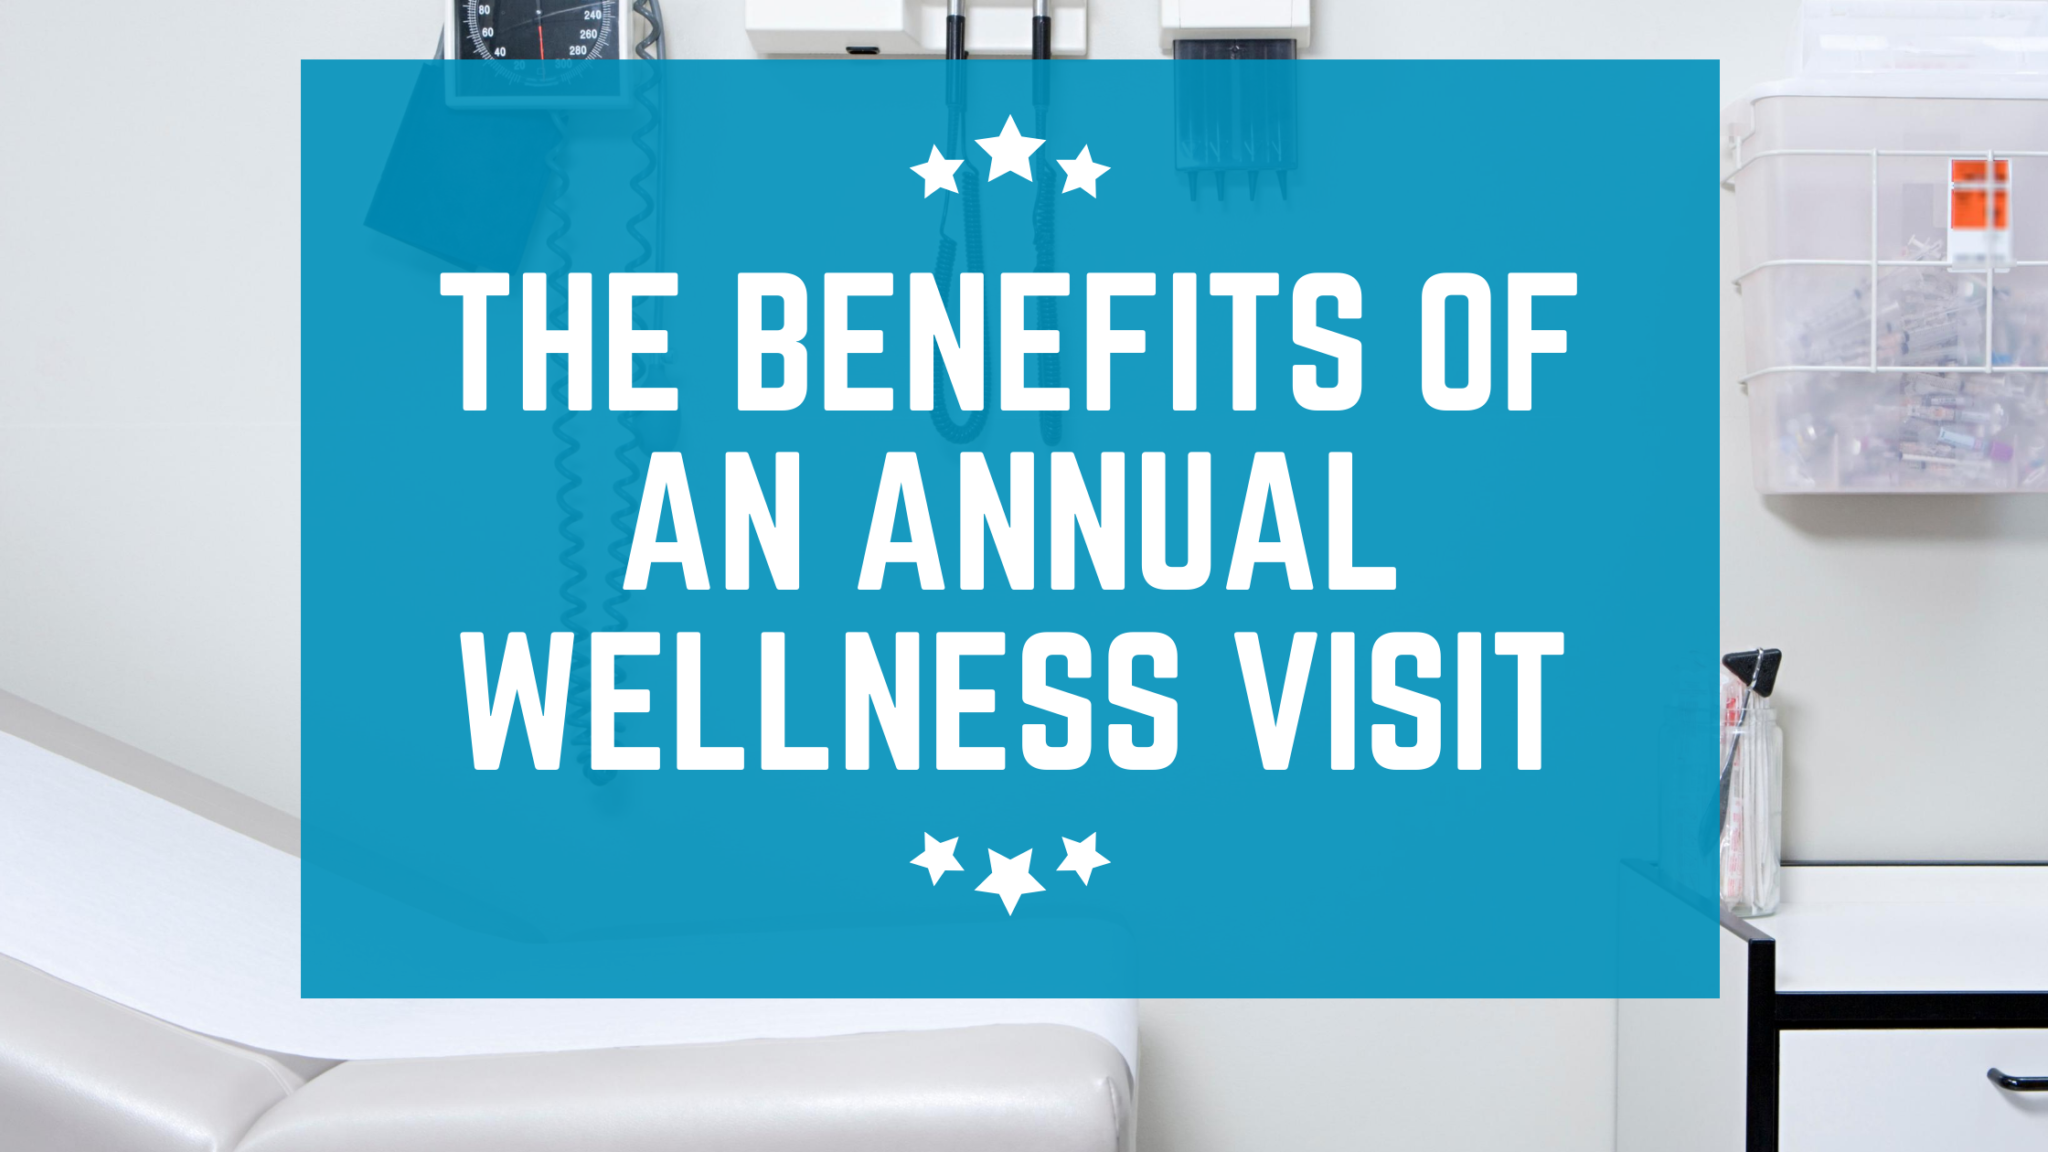 wellness visit meaning